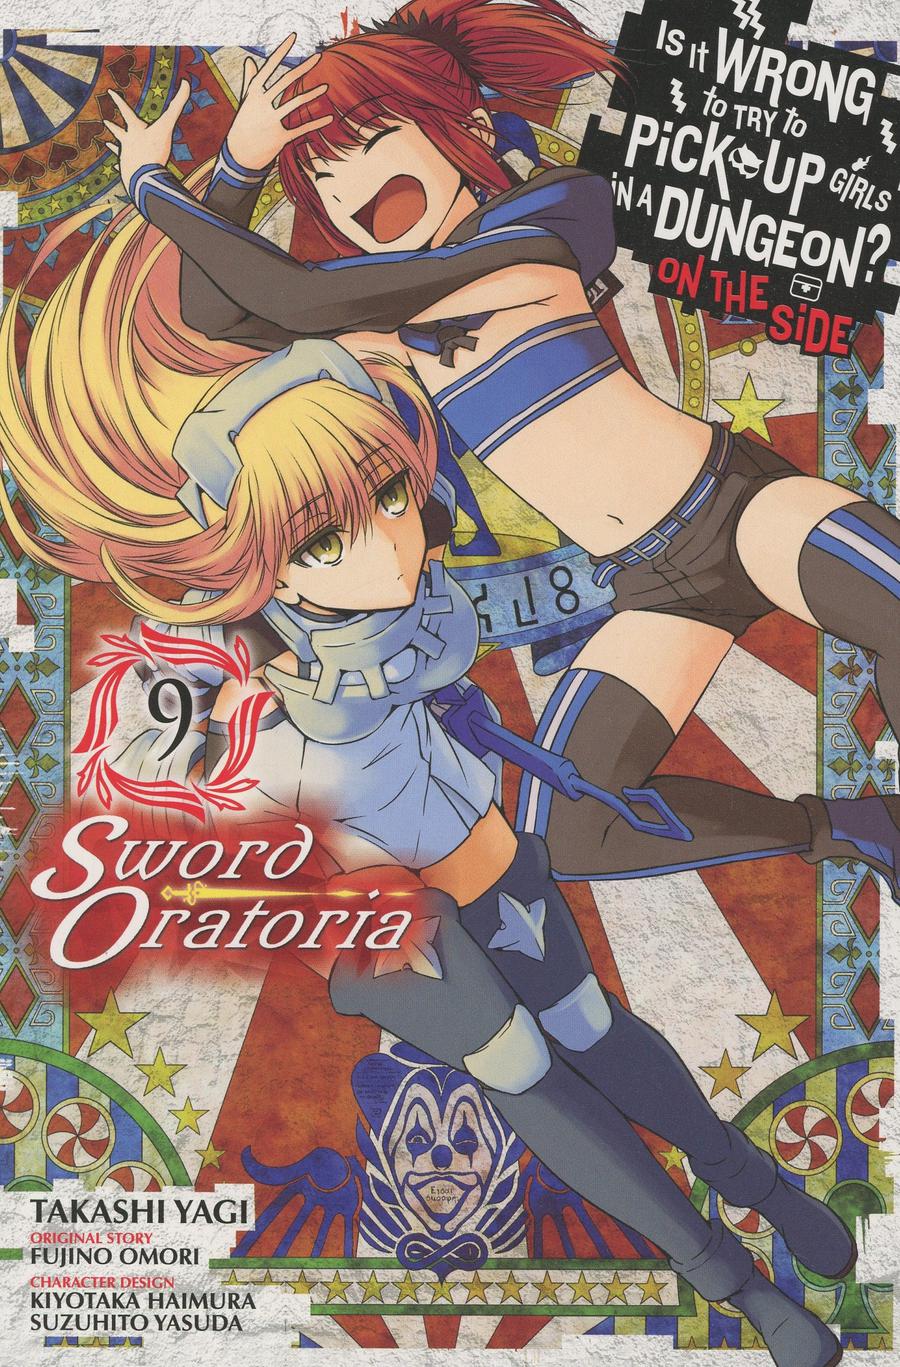 Is It Wrong To Try To Pick Up Girls In A Dungeon On The Side Sword Oratoria Vol 9 GN